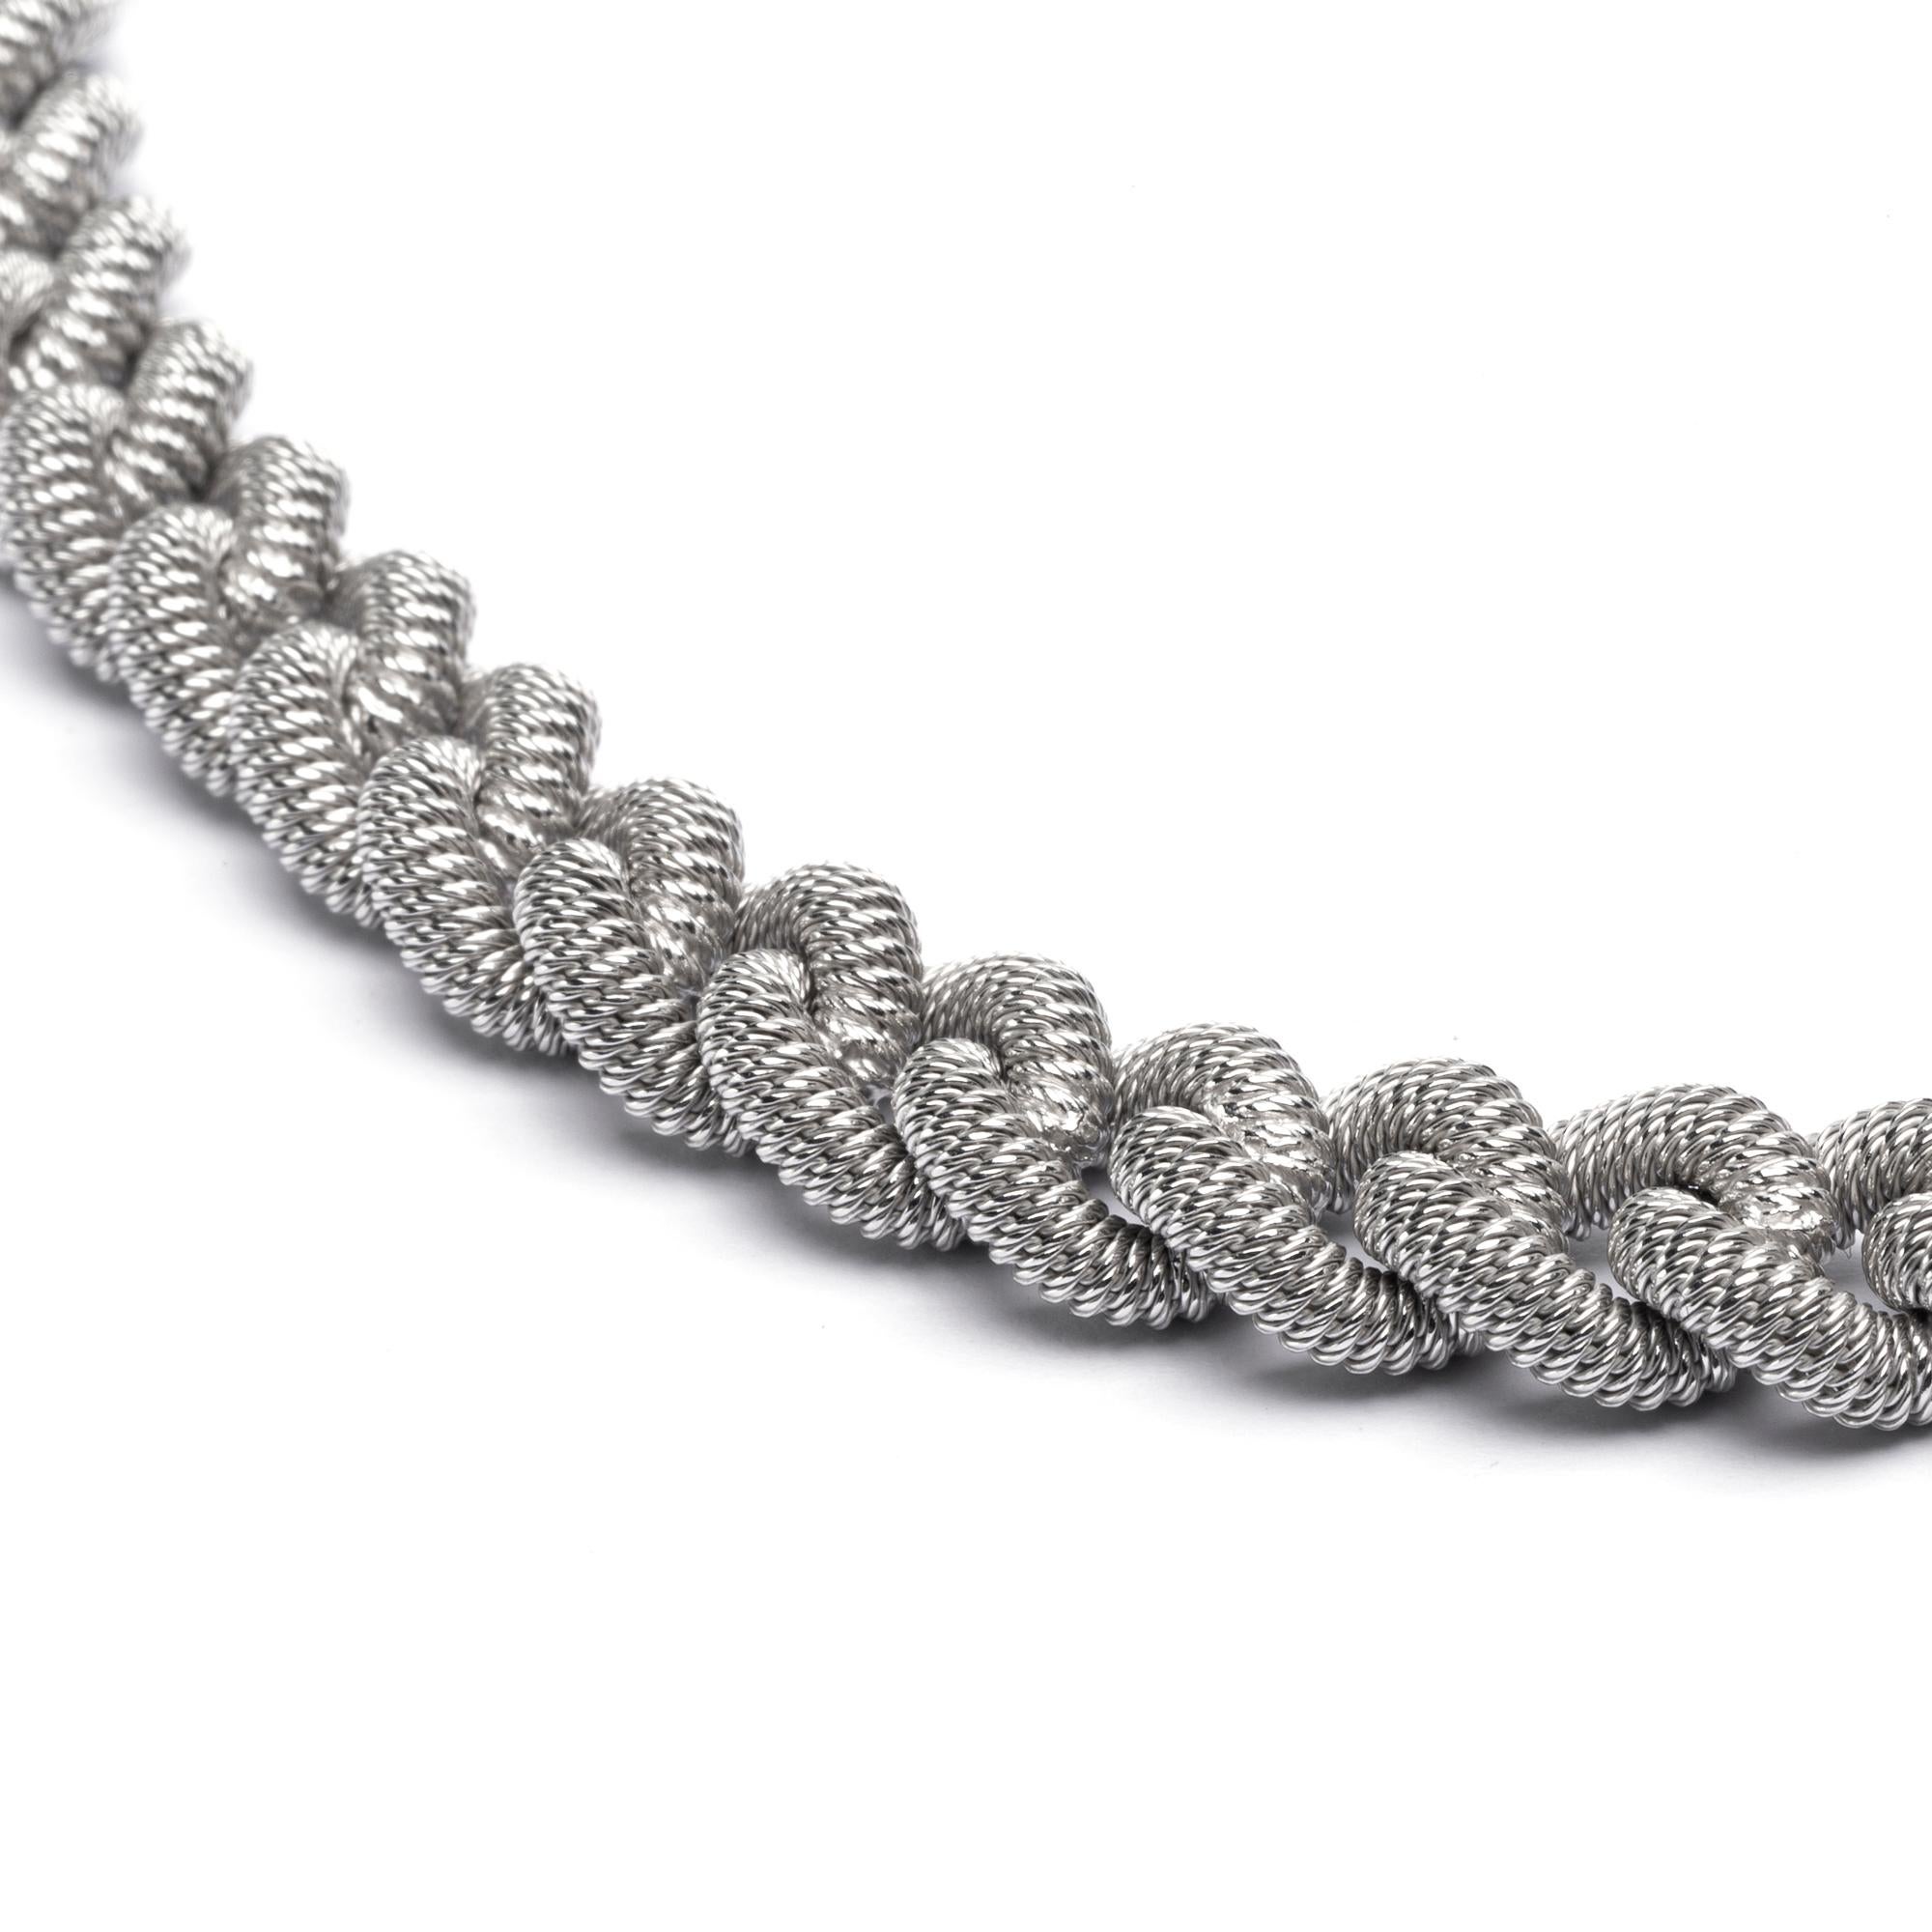 Alex Jona design collection, hand crafted in Italy, rhodium plated sterling silver twisted wire curb link chain necklace. Dimensions: L 17.32 in x 0.34 in. W x 0.24 in. D  -  L 44 cm x 9mm. W x 6 mm. D
Alex Jona jewels stand out, not only for their